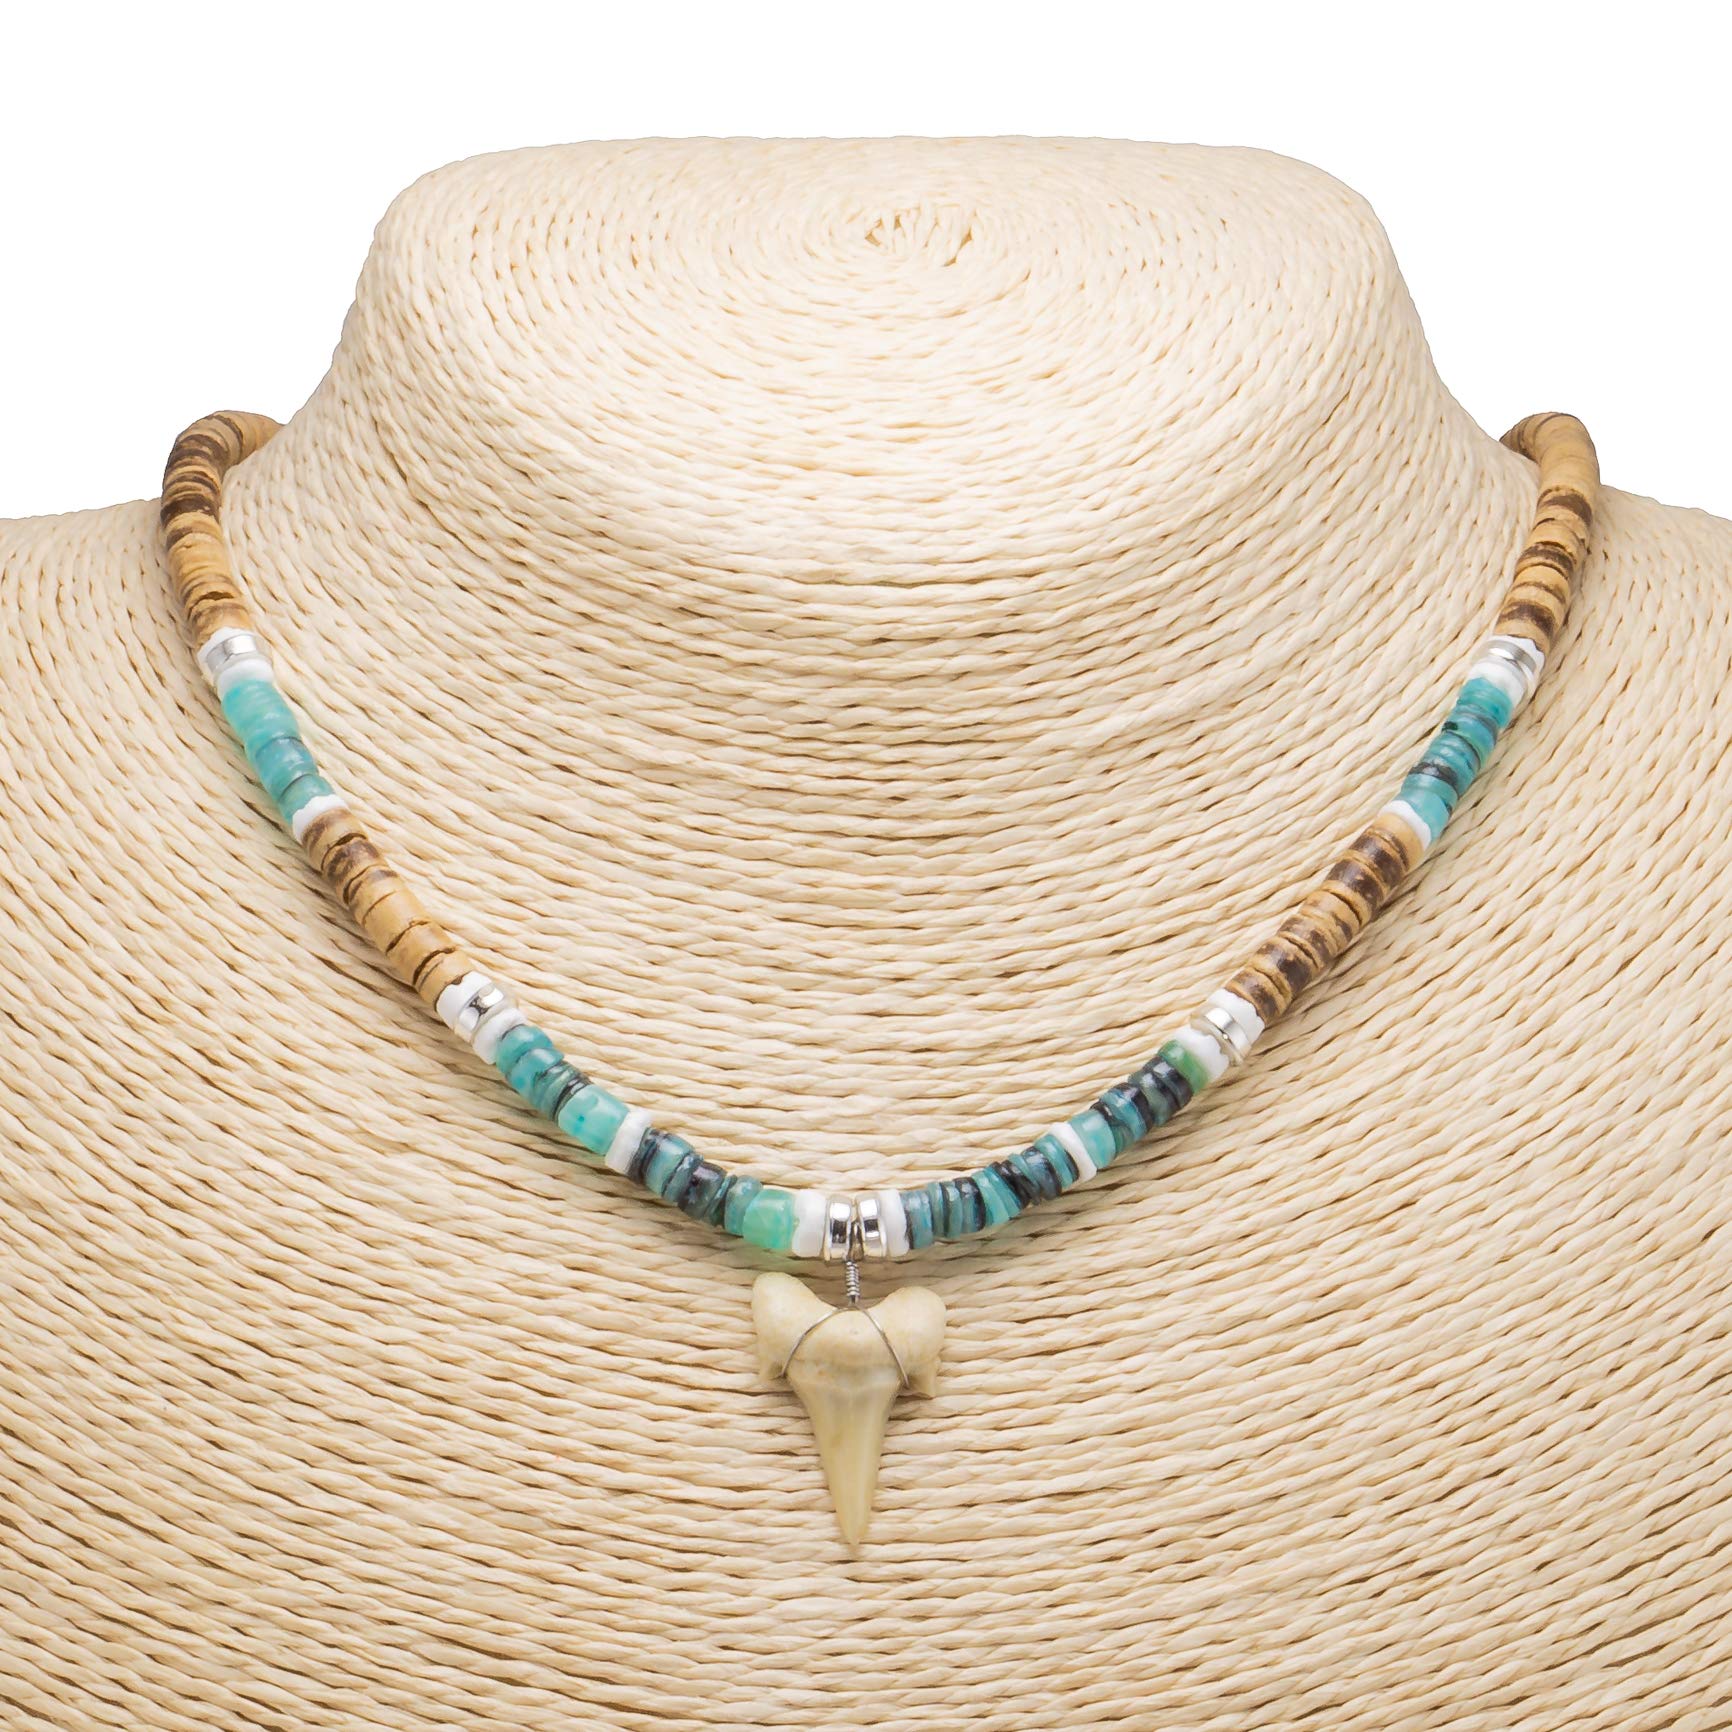 ¾"+ Shark Tooth Pendant on Tiger Coconut & Green Shell Beads Necklace